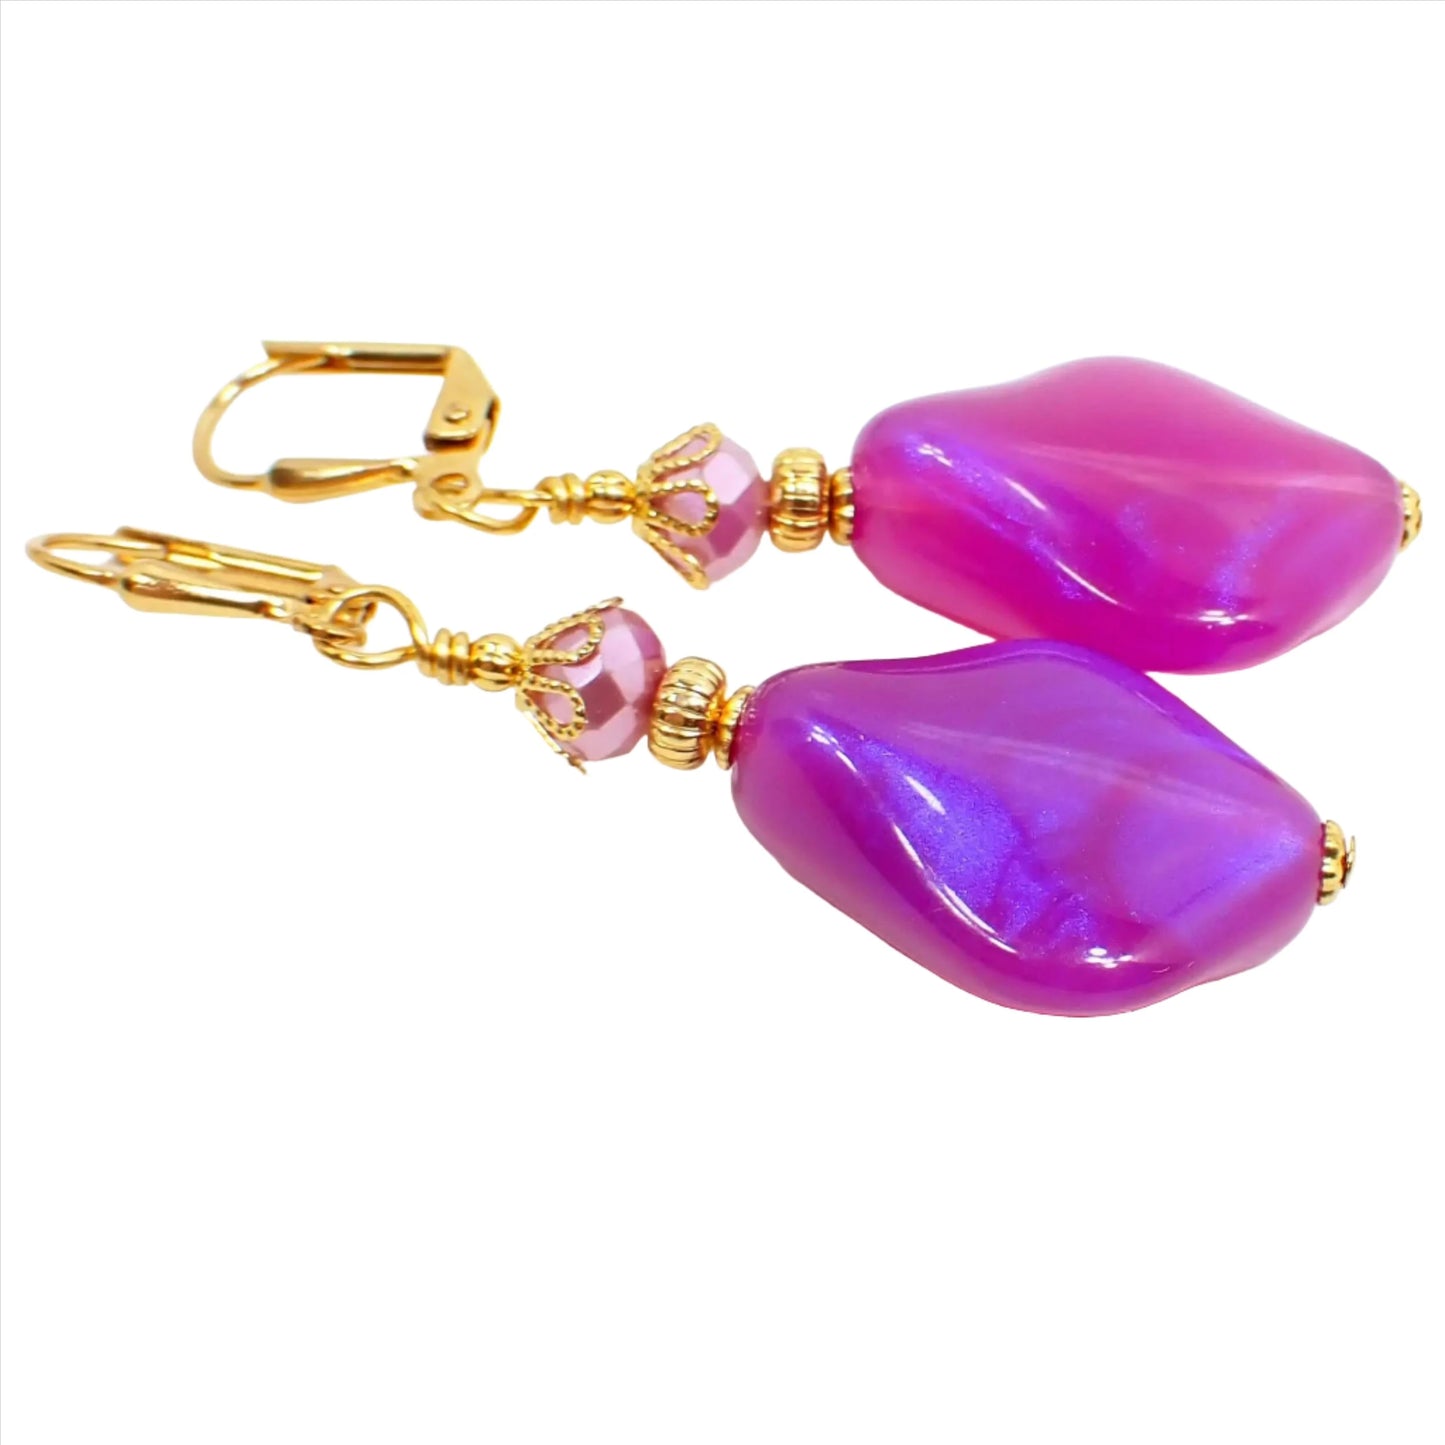 Front view of the handmade color shift purple lucite earrings. The metal is gold plated in color. There are pearly glass faceted beads at the top and angled teardrop beads at the bottom. The bottom beads have an indented curve and are bright purple in color with hints of sparkly purple as you move around.